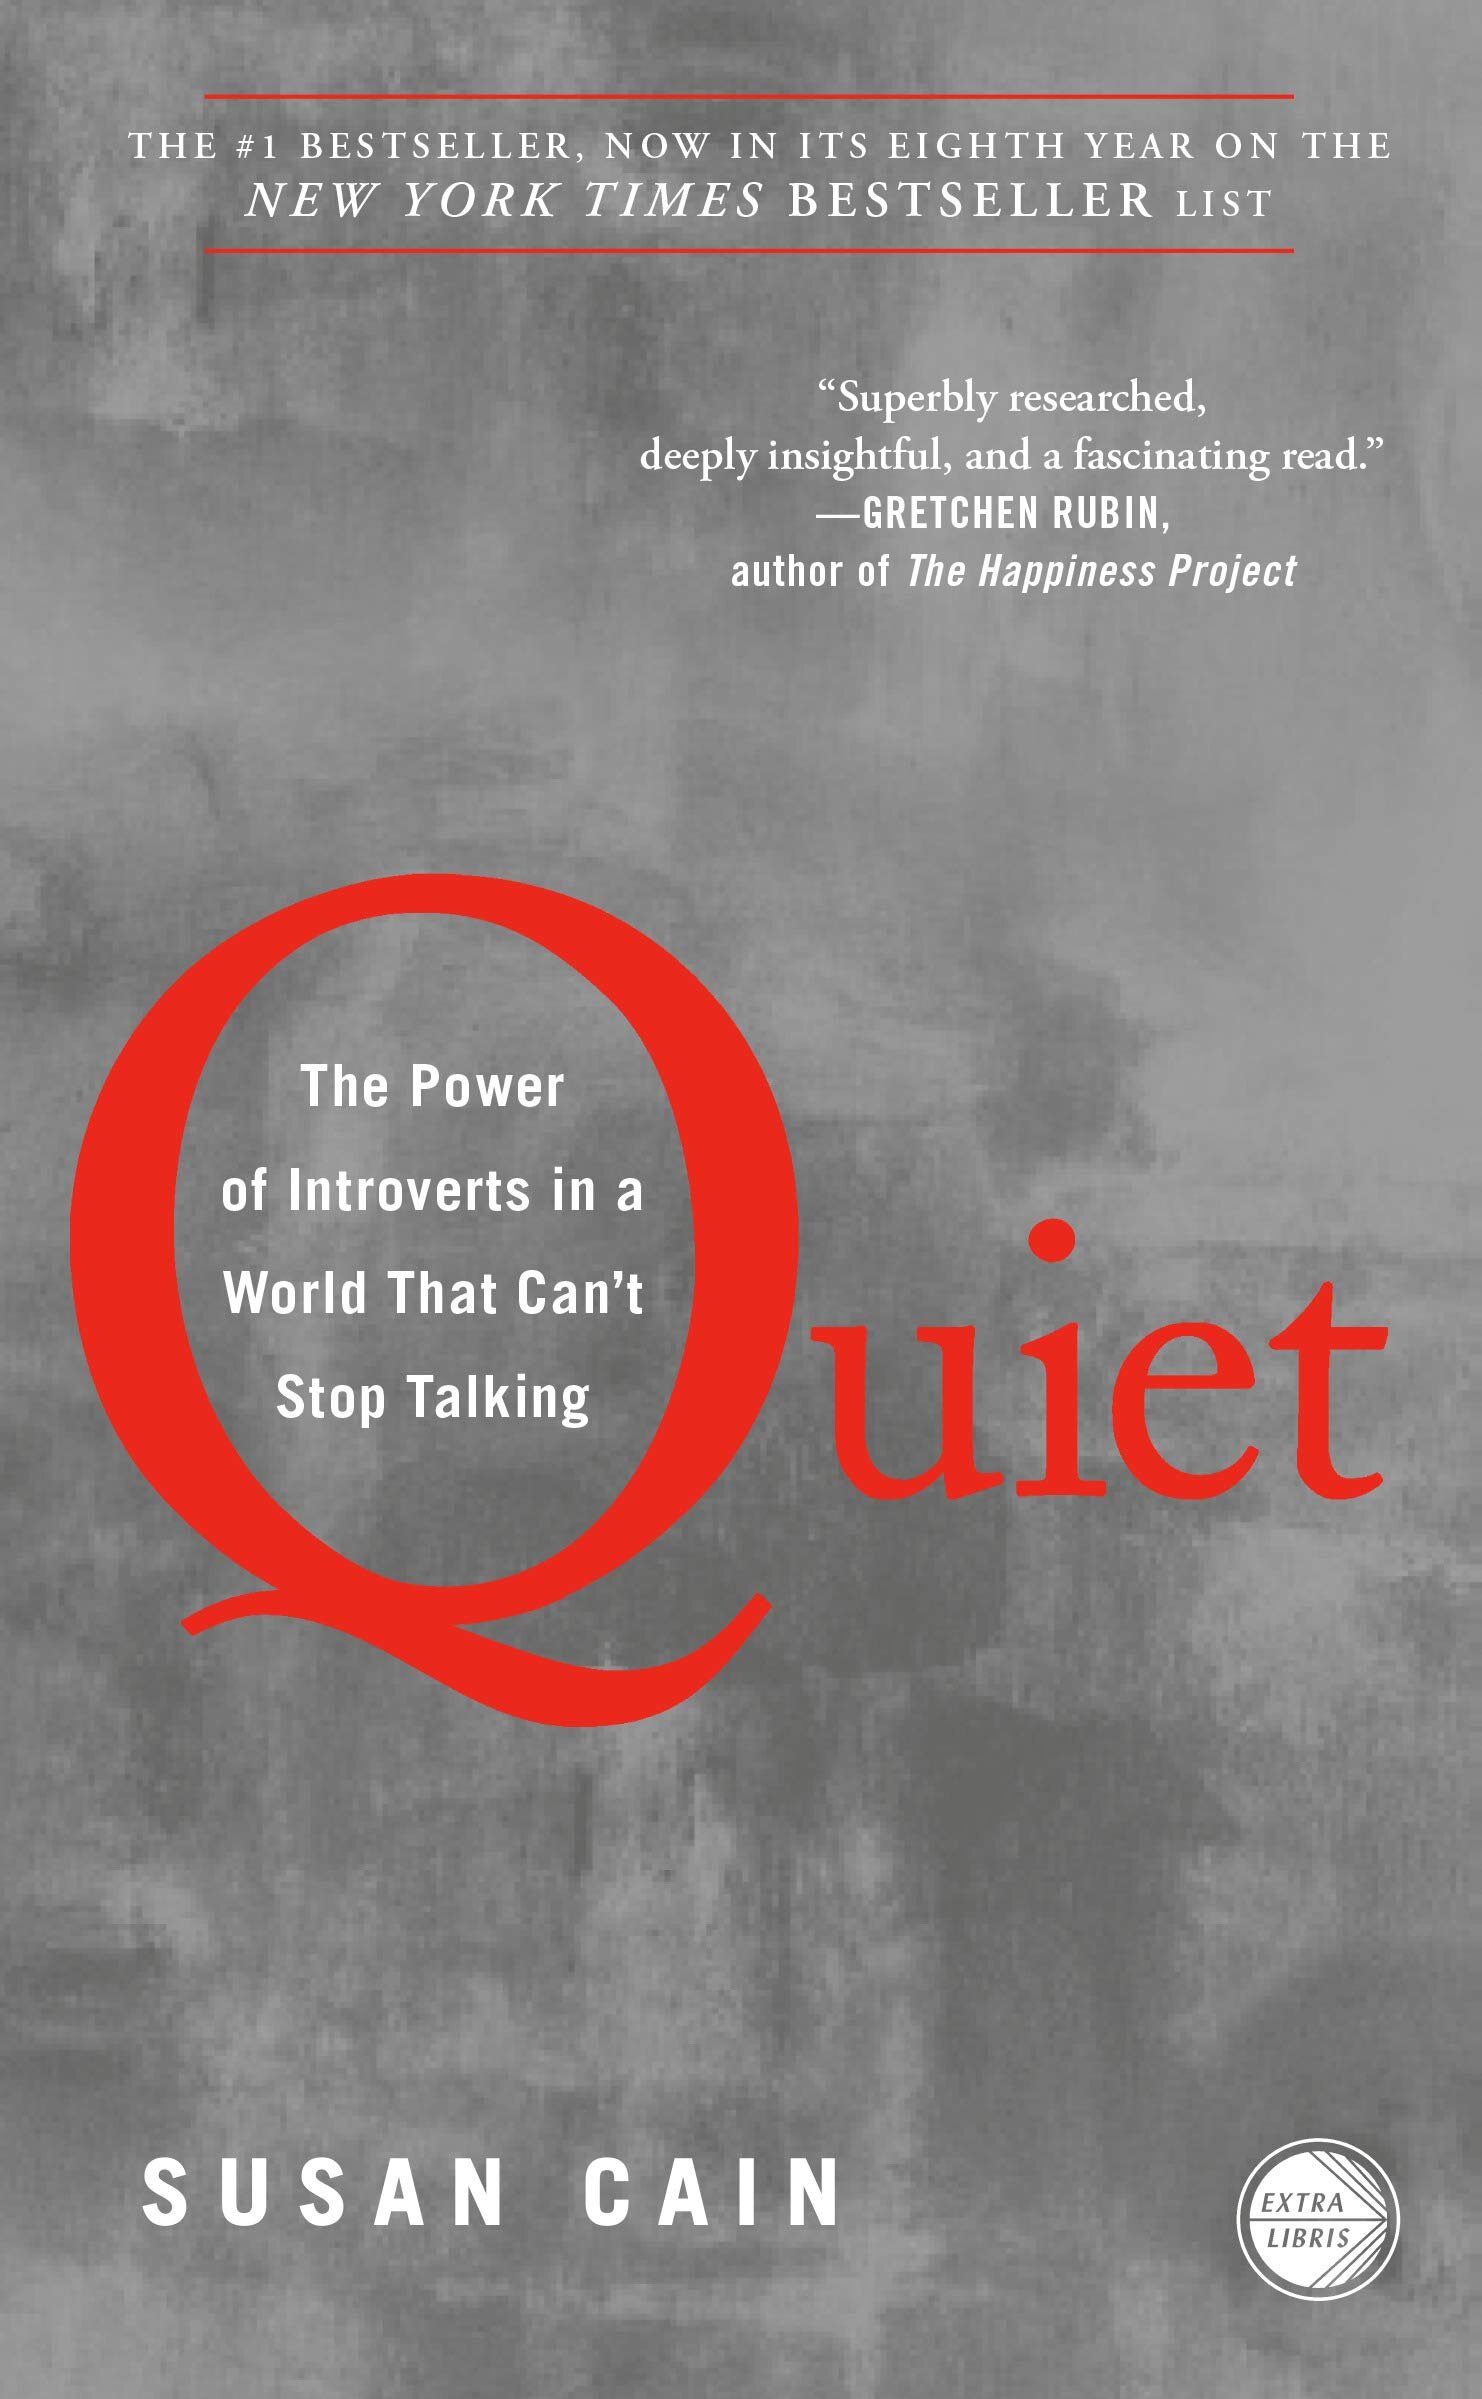 Quiet: The Power of Introverts in a World That Can't Stop Talking - Susan Cain, Kathe Mazur, et al.